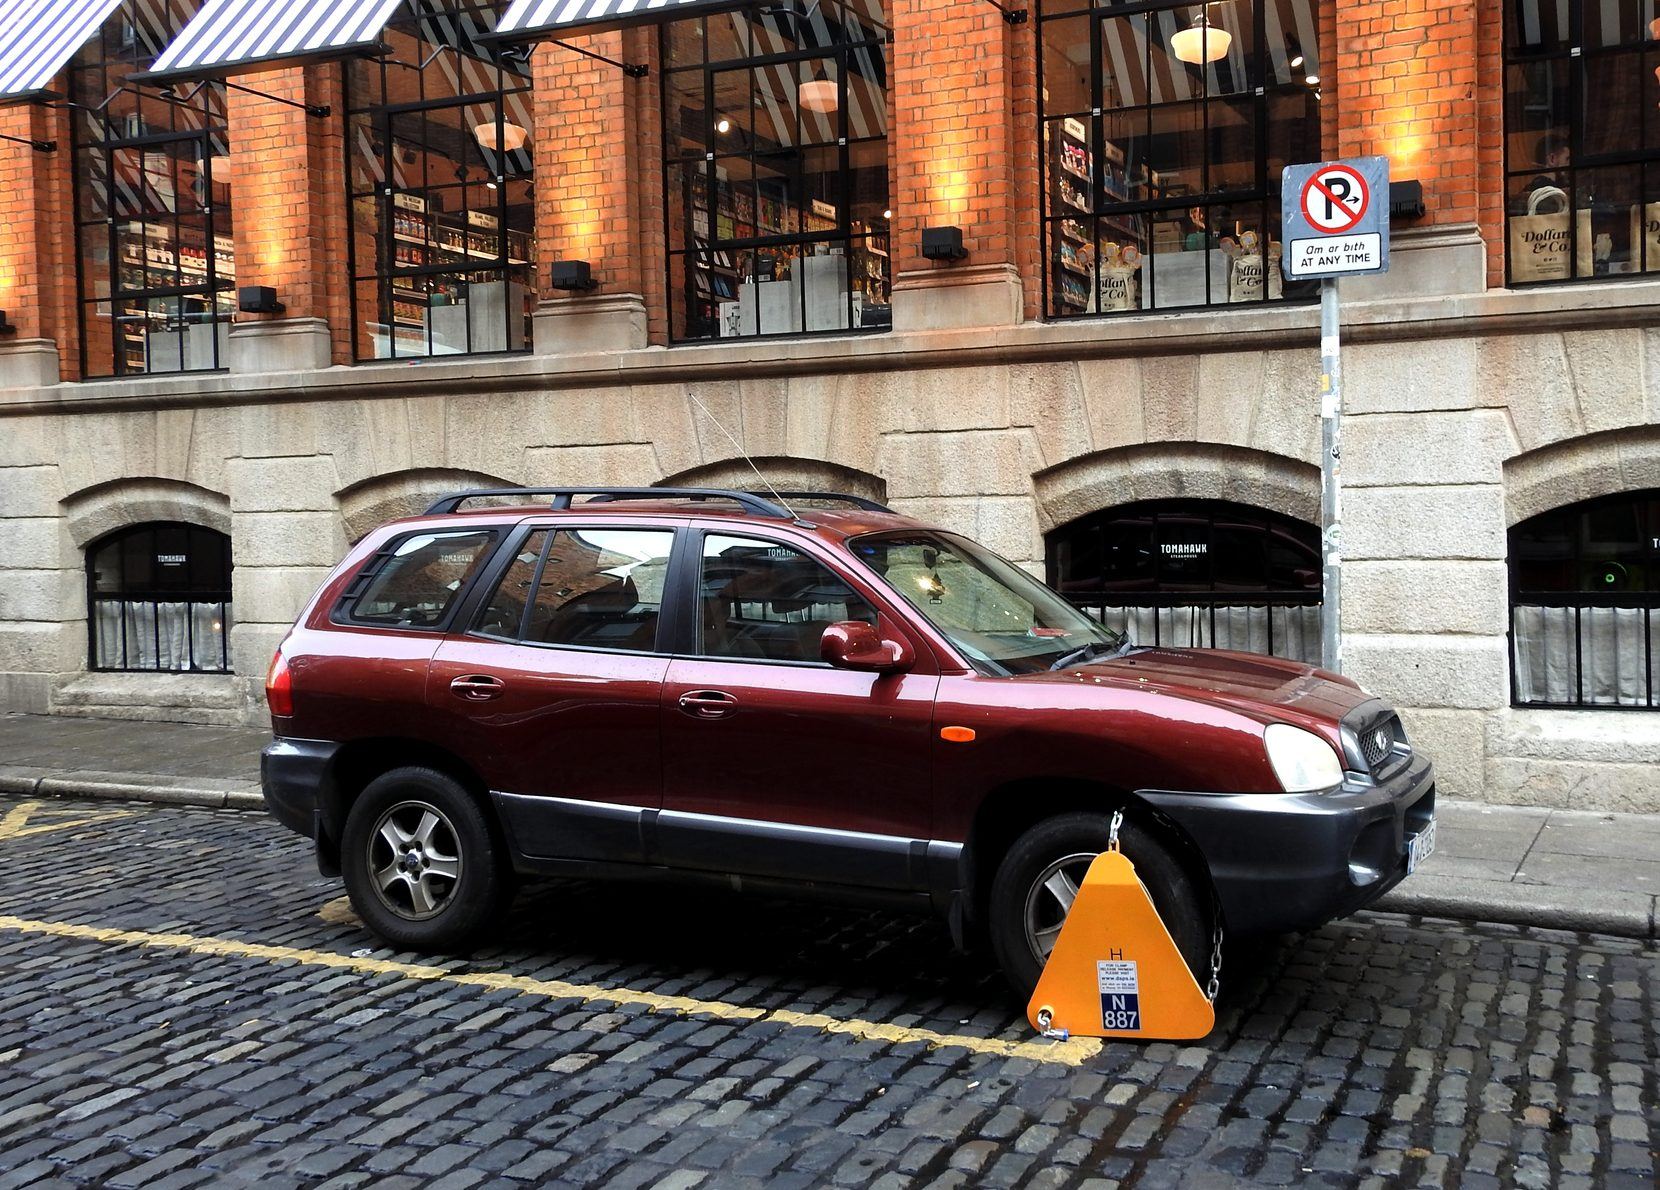 Parking in Ireland – where (not) to park - The AA